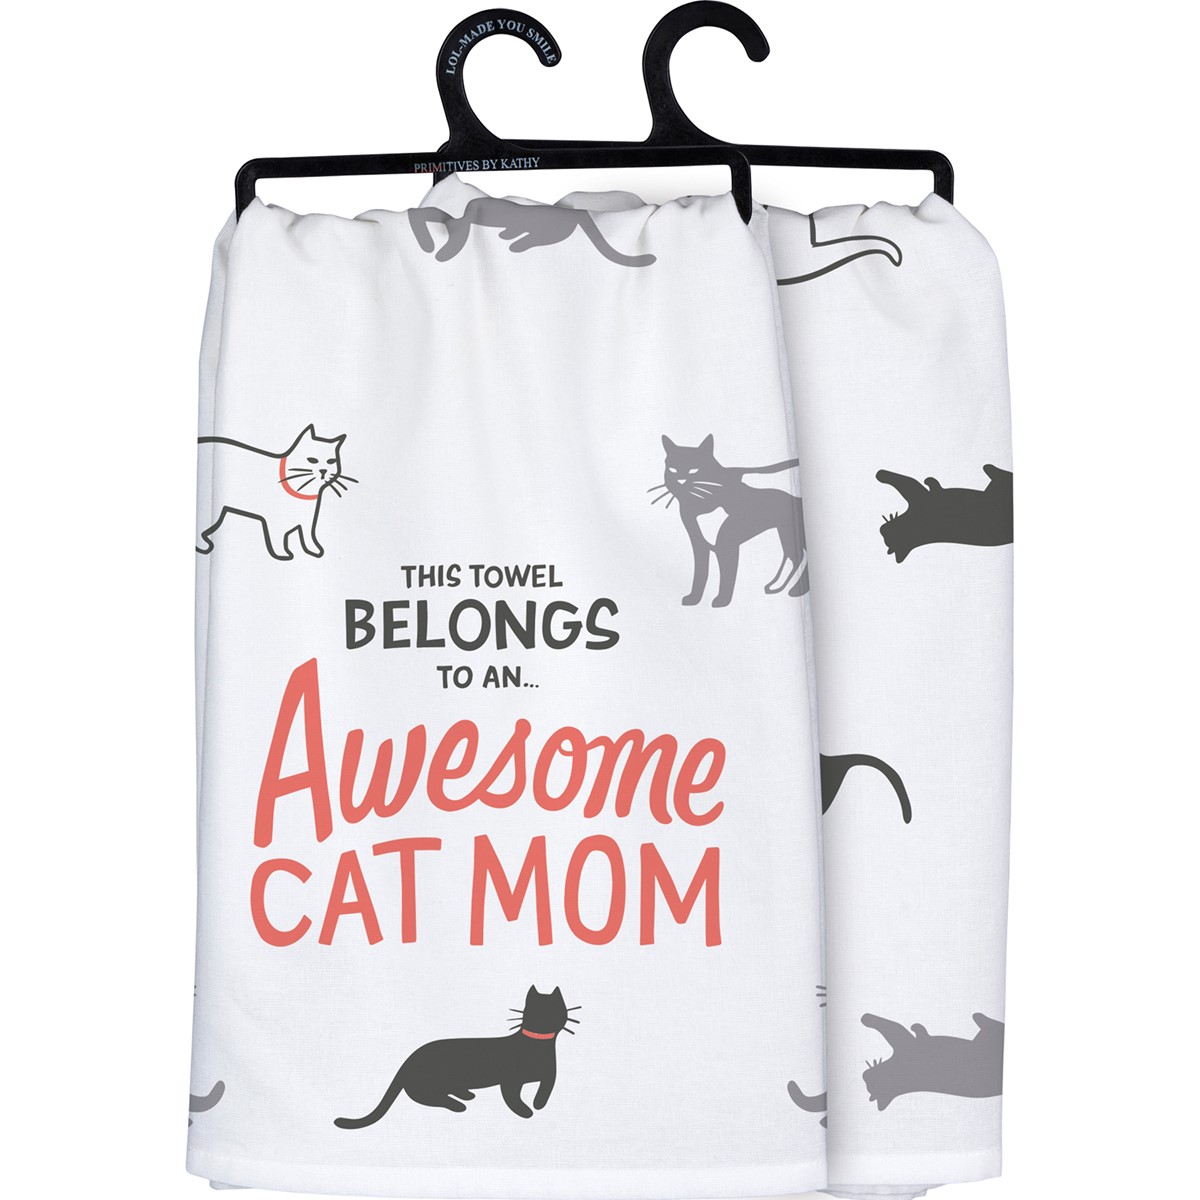 Awesome Cat Mom Kitchen Towel - Cotton